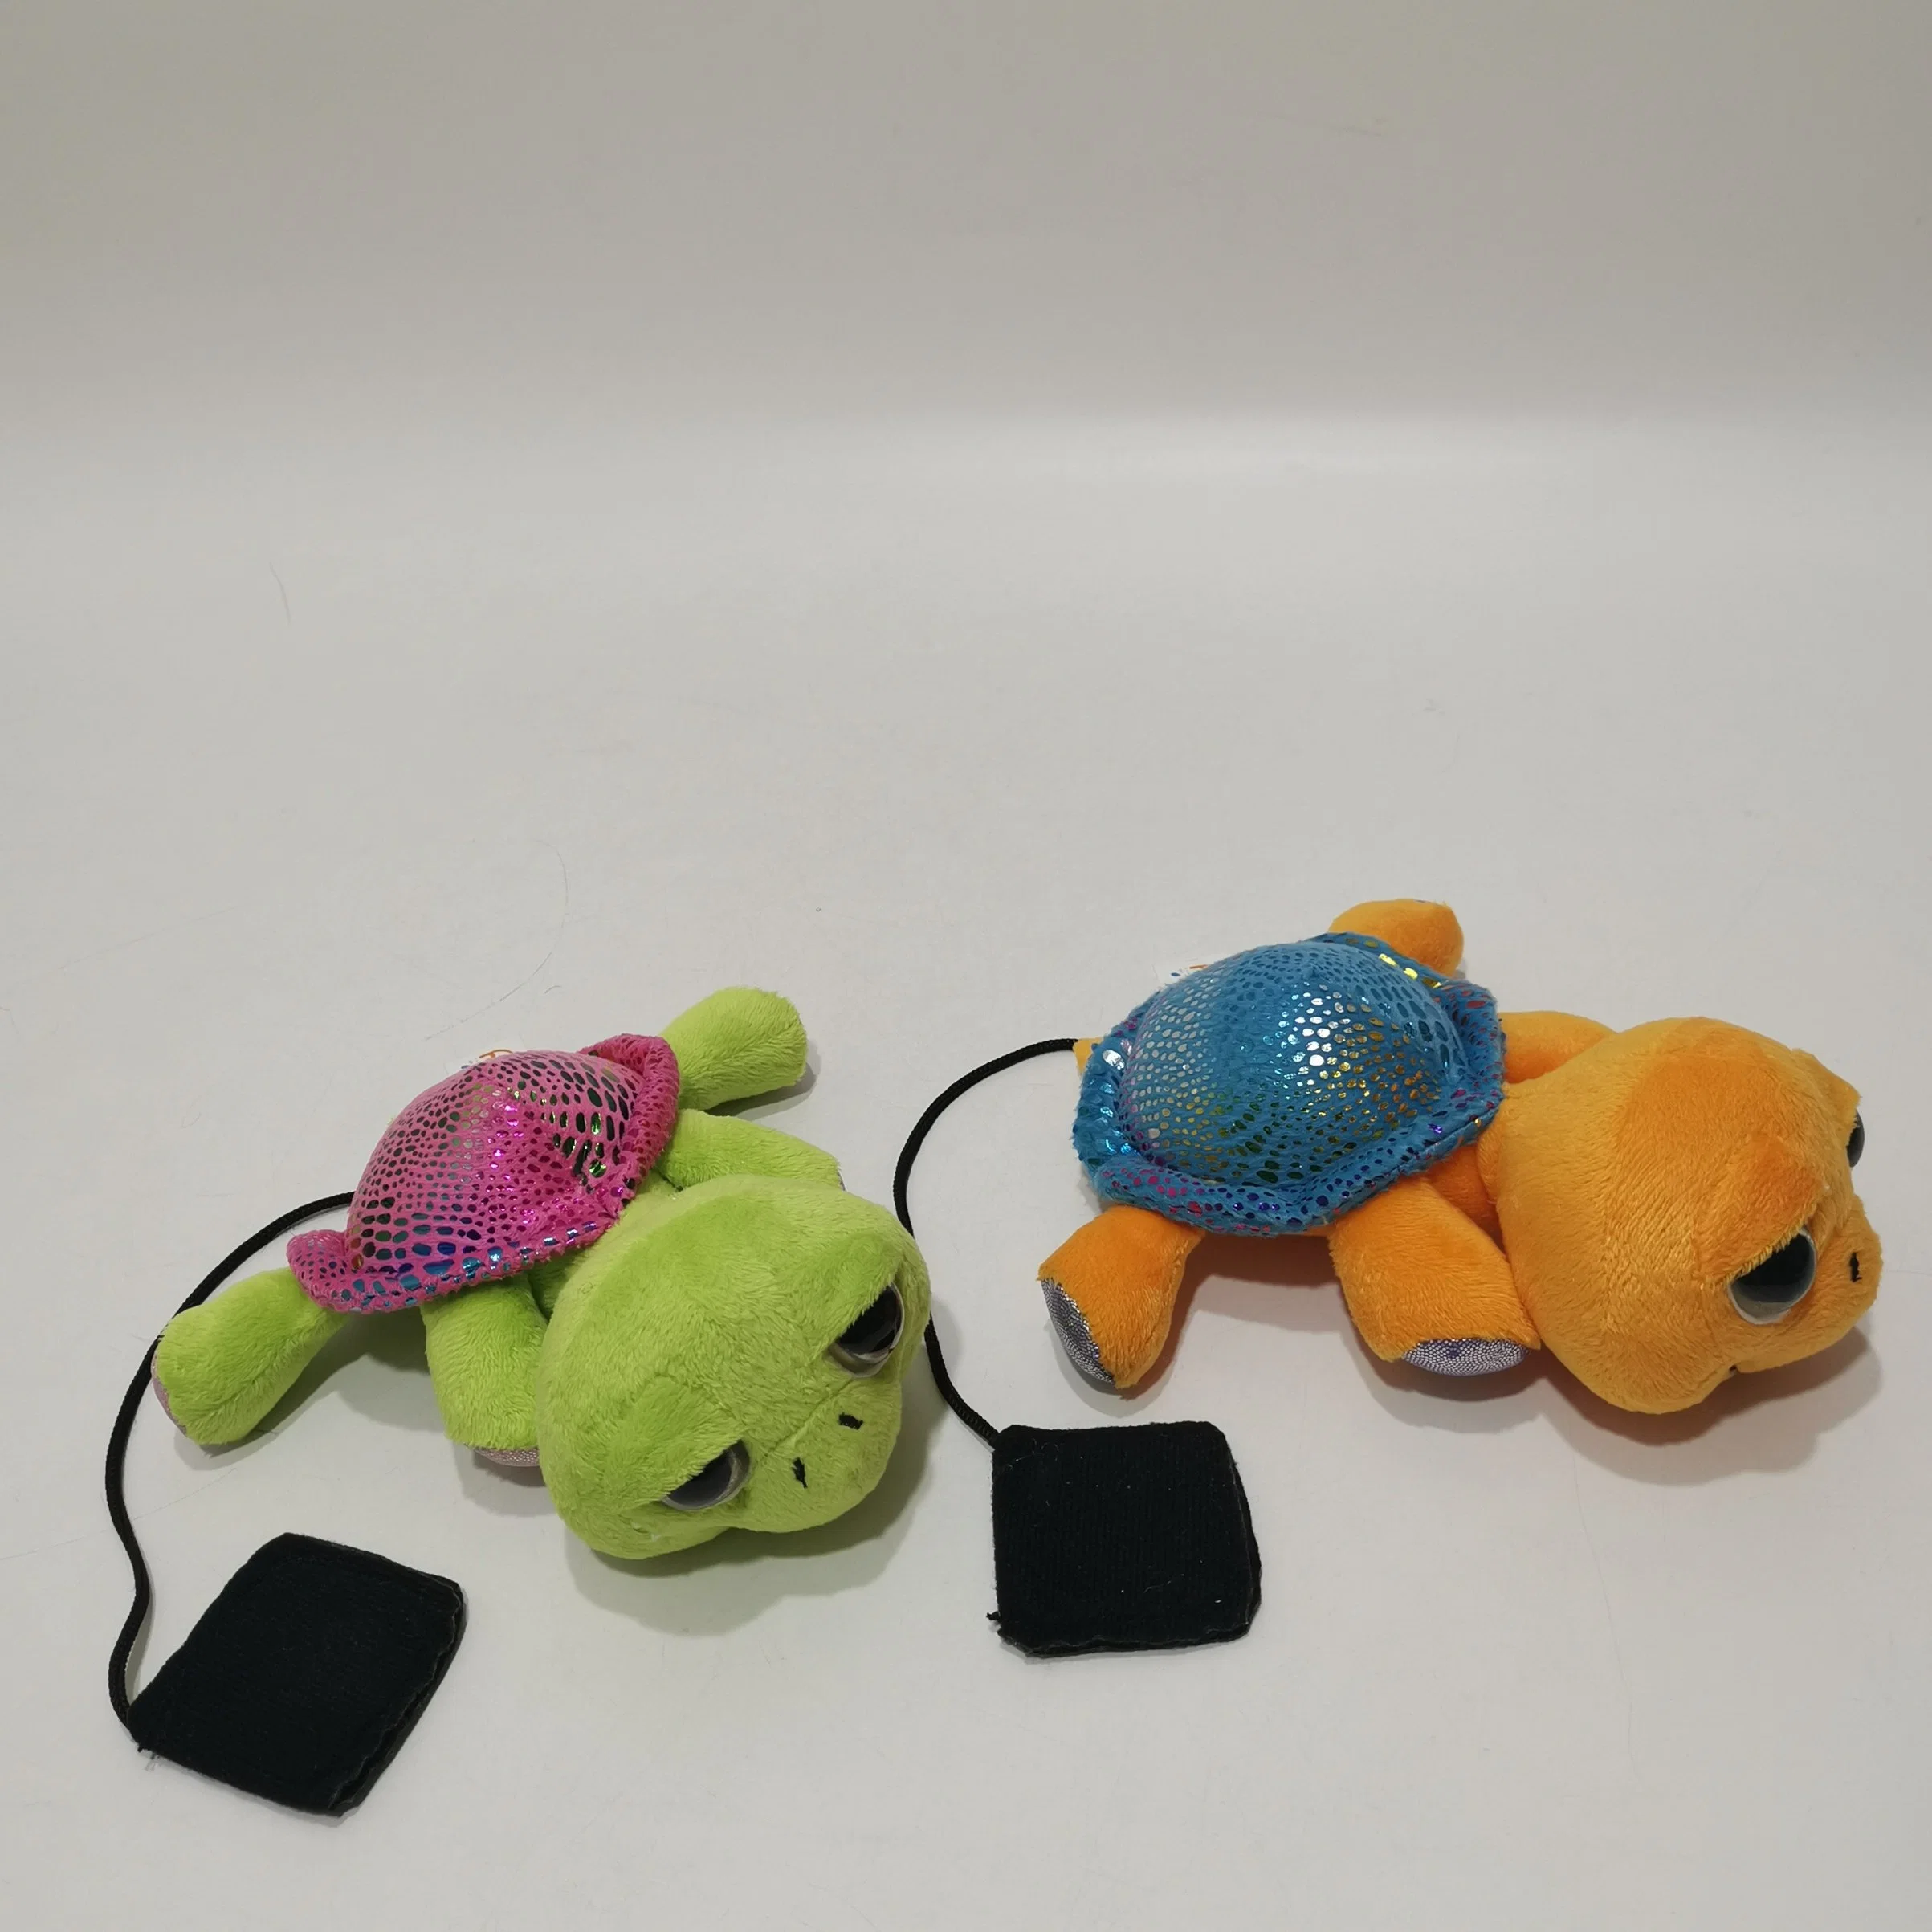 OEM 2 Clrs Plush Tortoises with Magnet Toys Stuffed Novelty Toys for Kids Education & Stress Relief